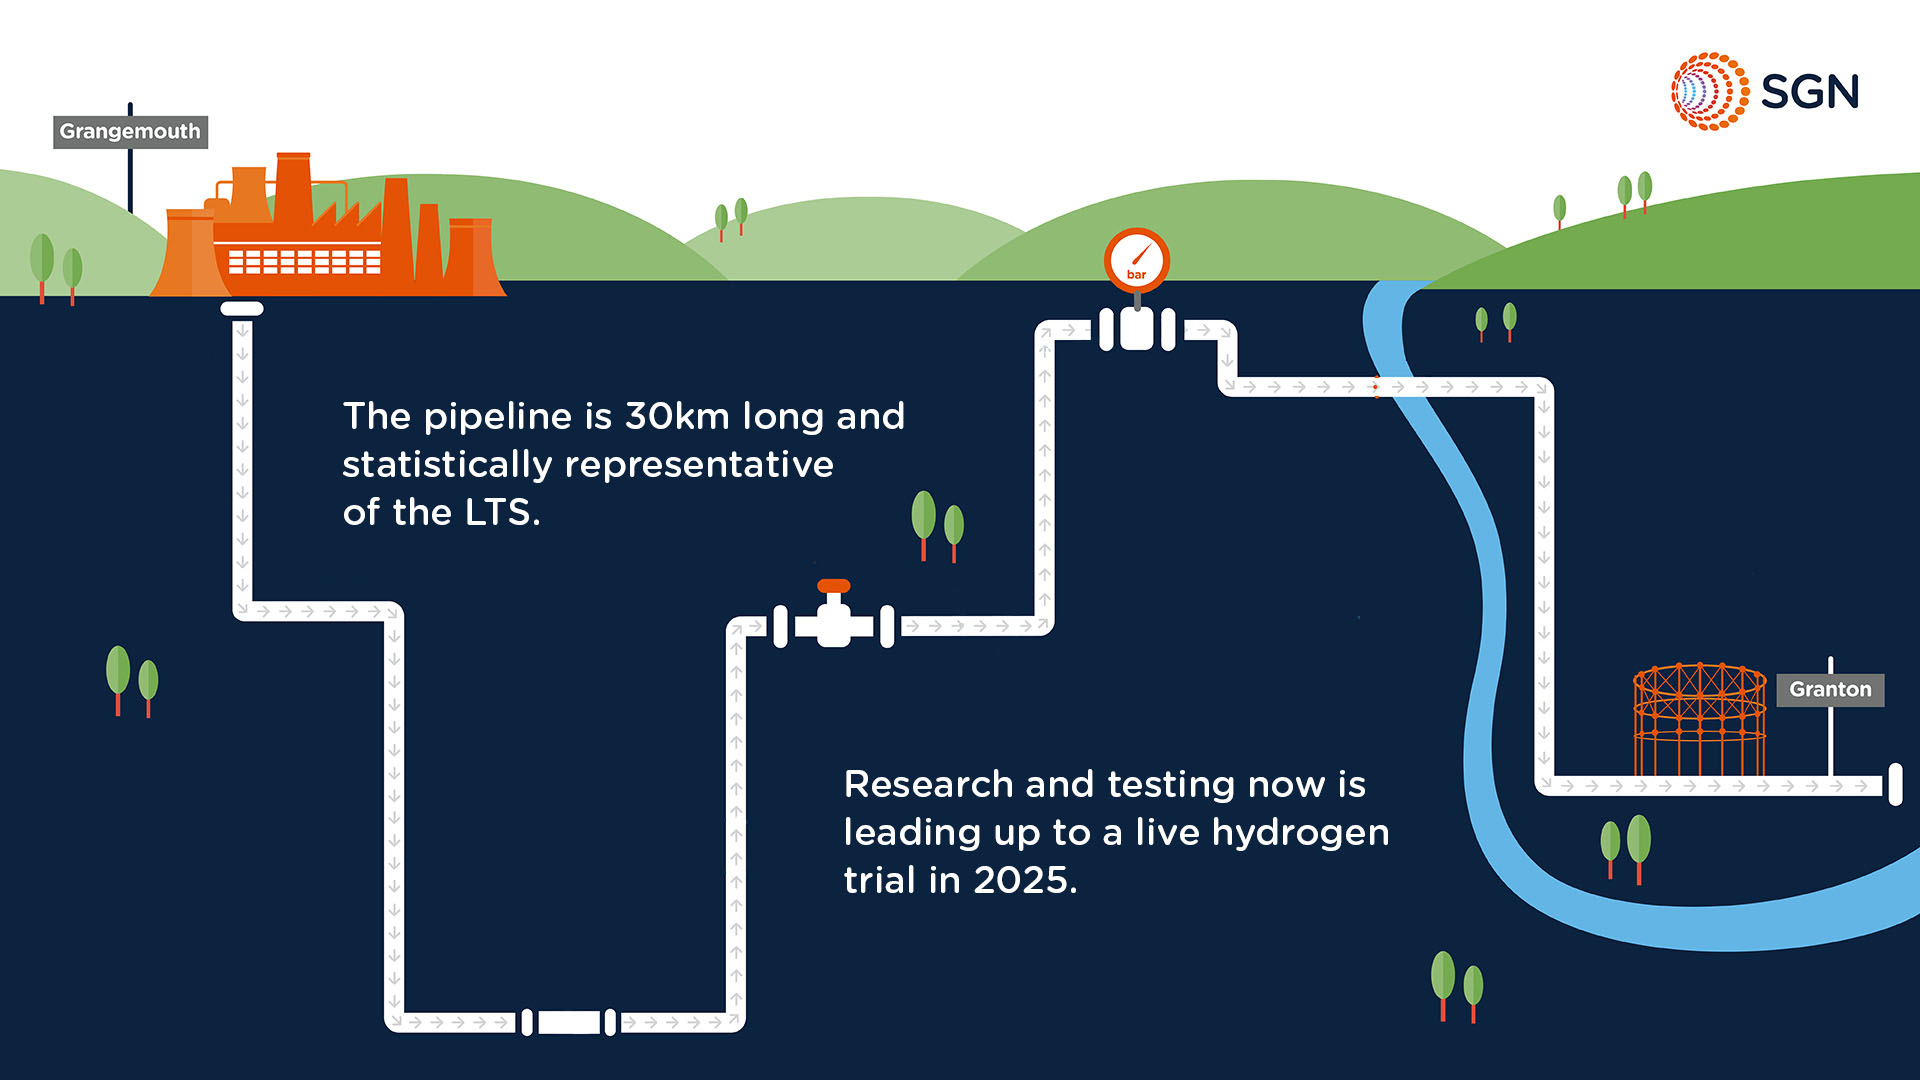 An infographic showing the decommissioned pipeline from Grangemouth to Granton